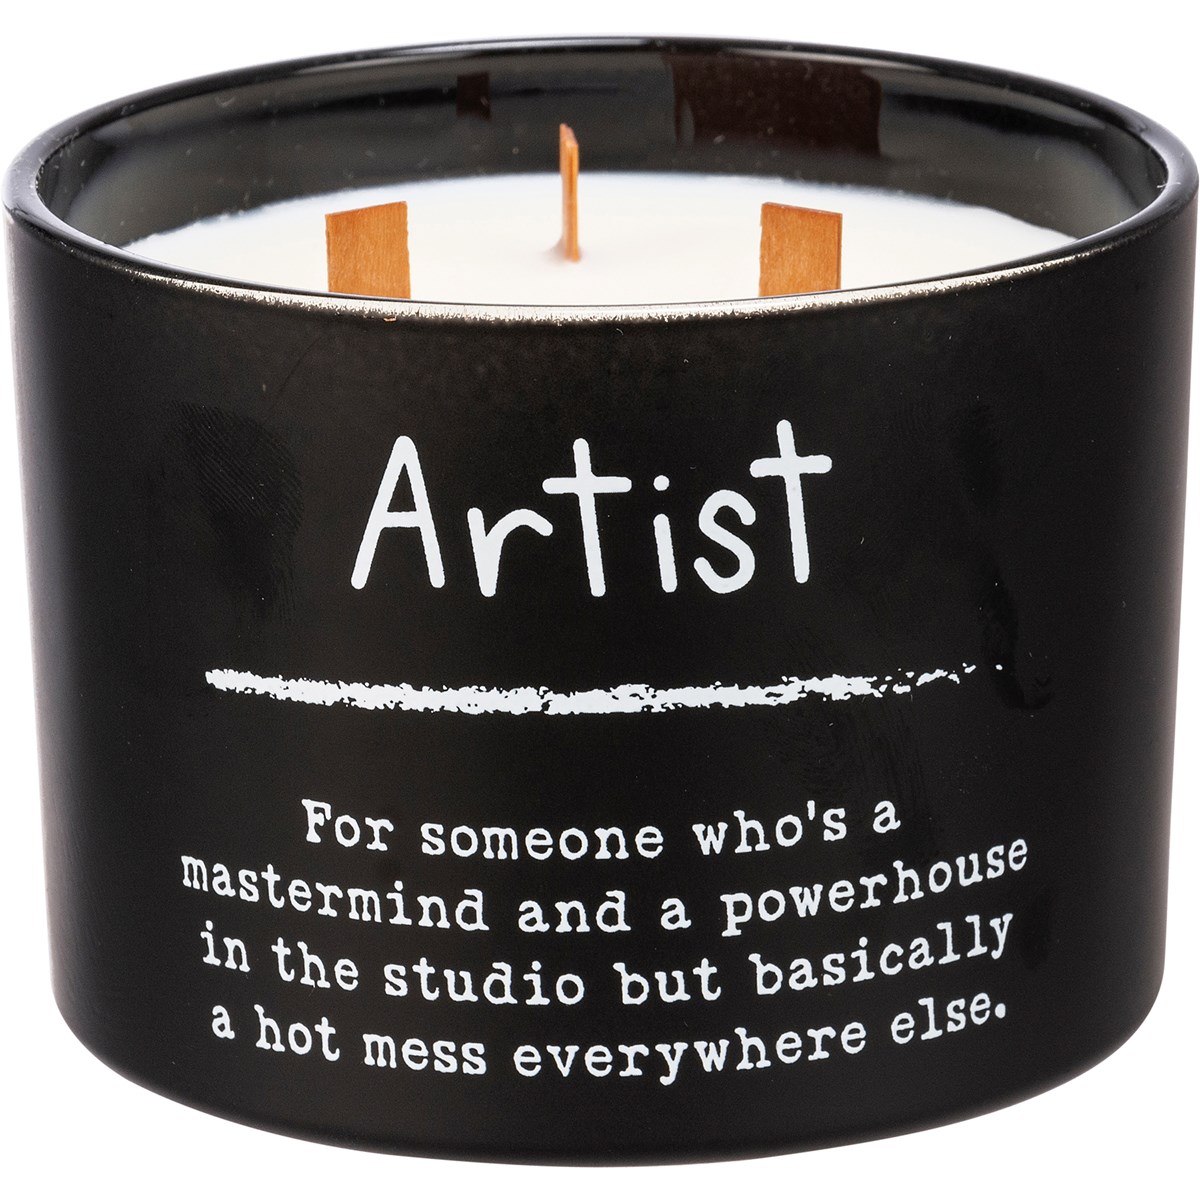 Artist Candle - Soy Wax, Glass, Wood